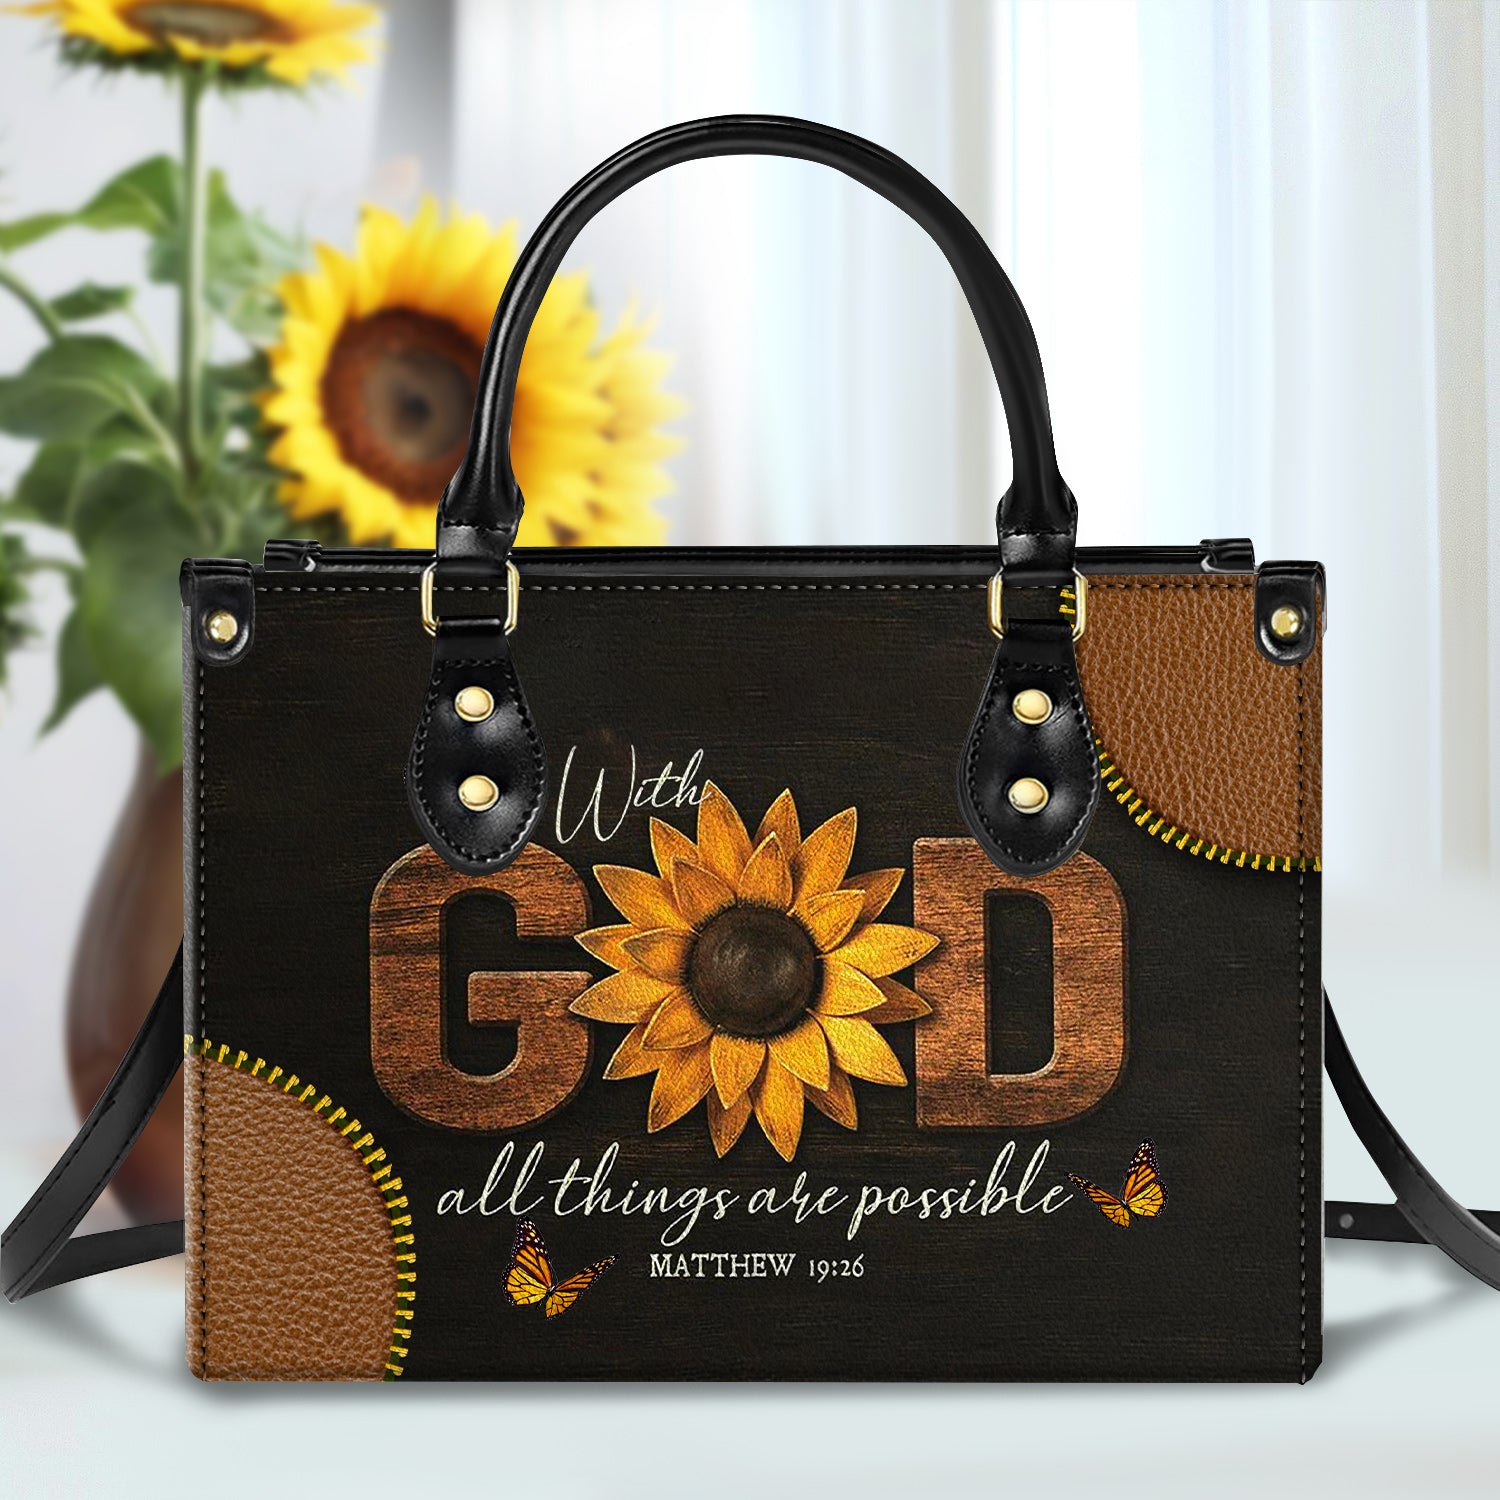 Sunflower All Things Are Possible Zippered Leather Handbag With Handle Christian Gift Religious Gift For Women